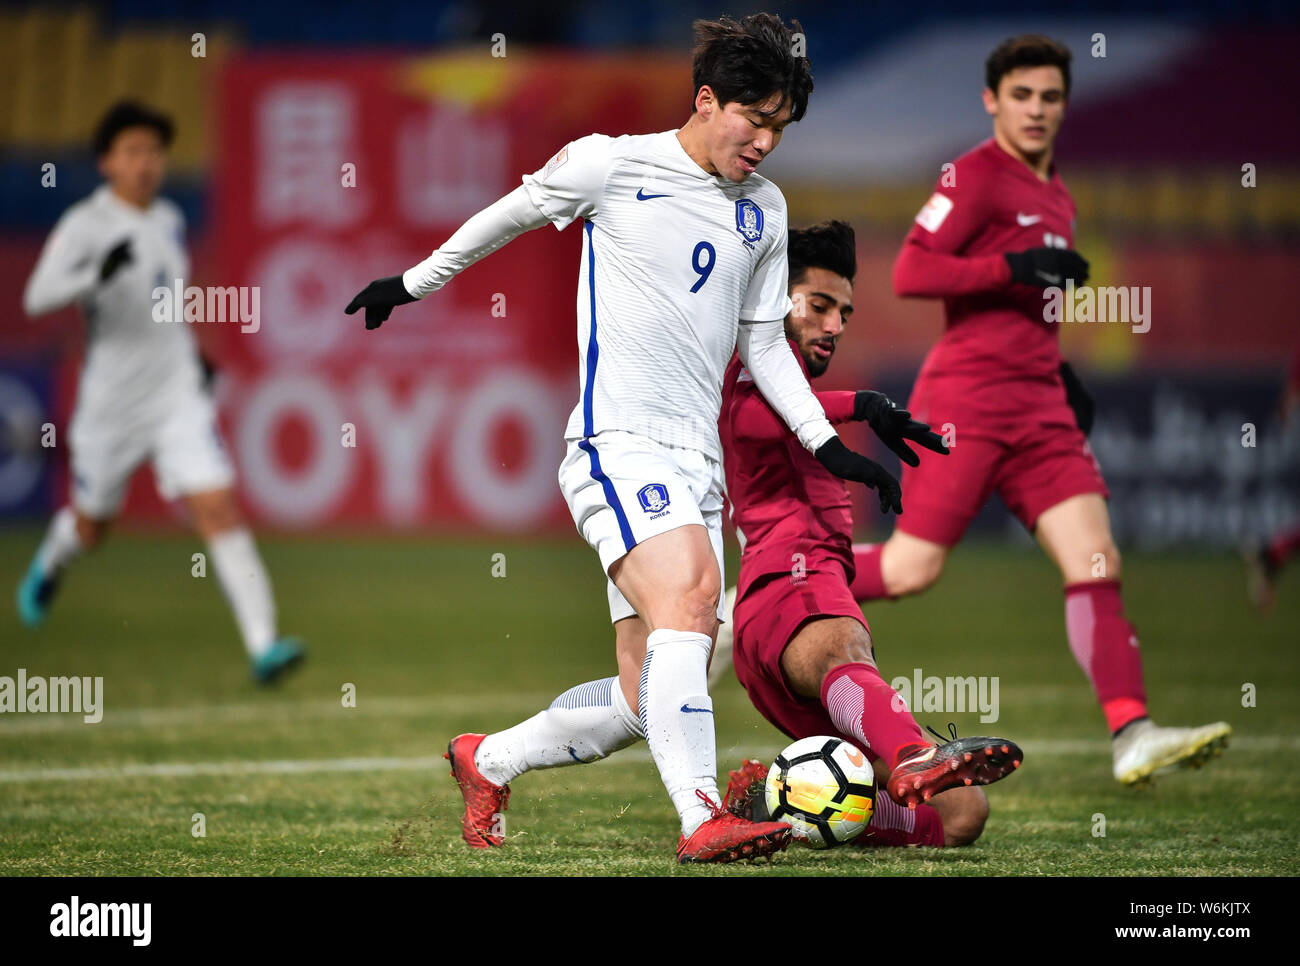 Lee Keun-ho, left, of South Korea kicks the ball to make a pass against a player of Qatar in their final match to fight for the third place during the Stock Photo